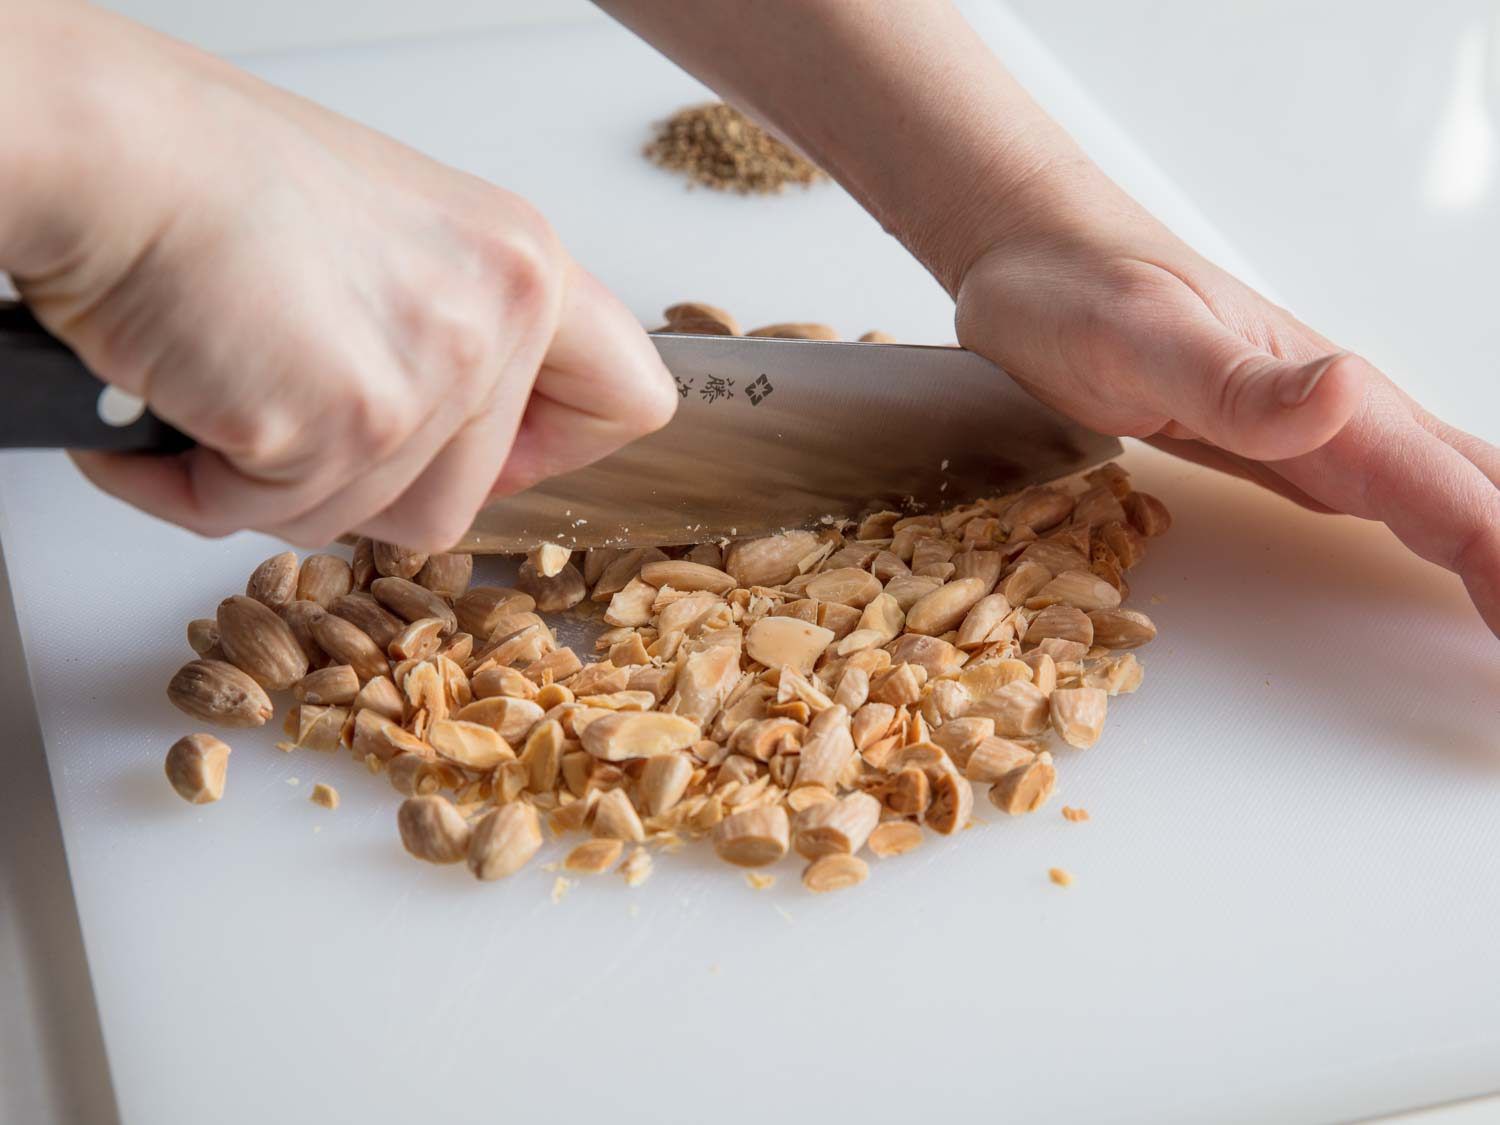 Chopping toasted almonds.